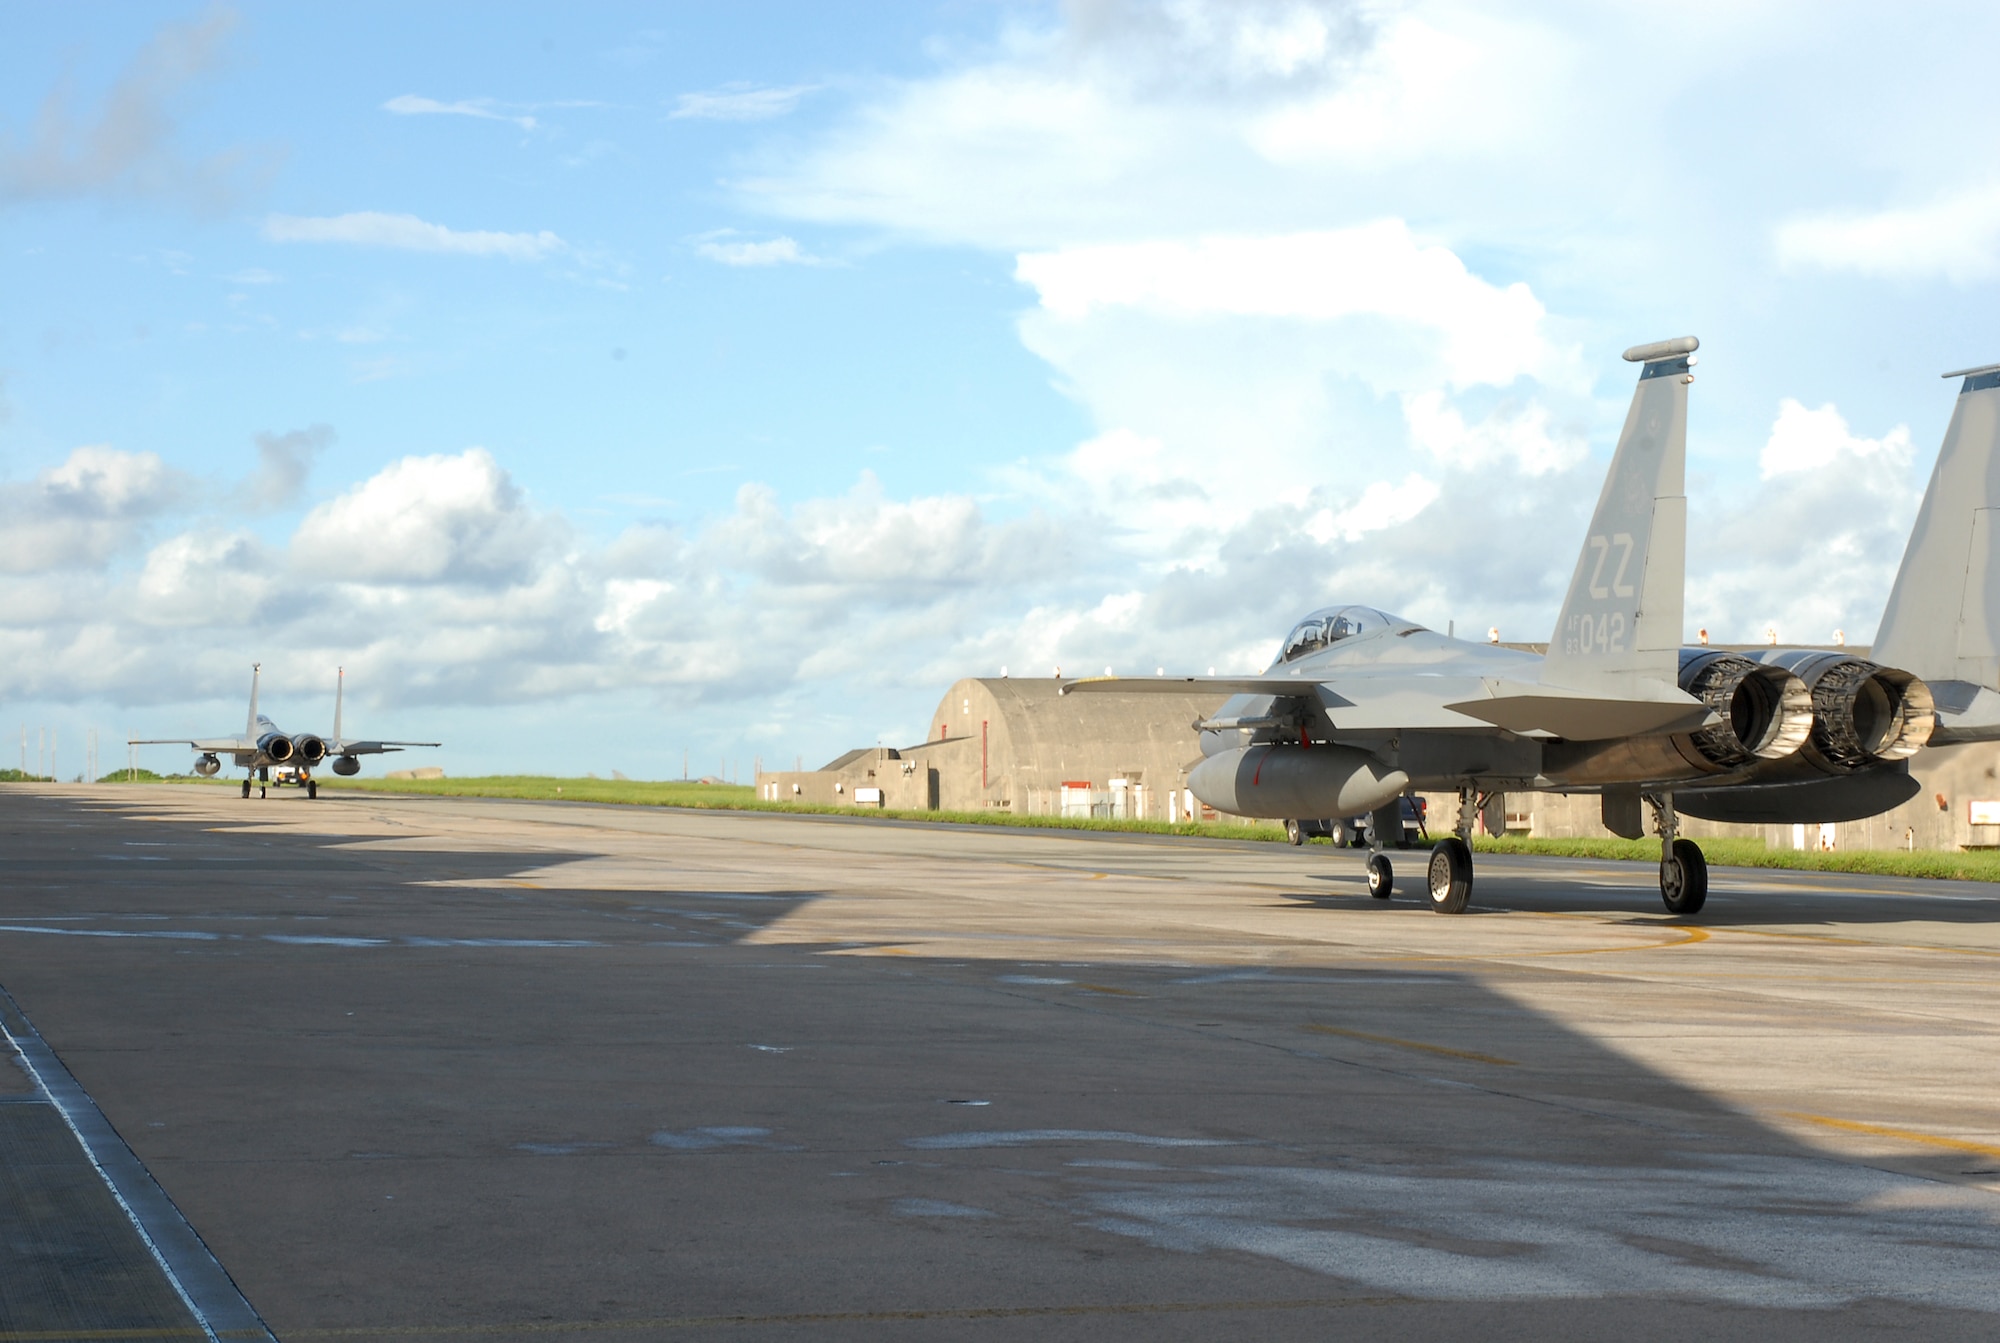 Two F-15C Eagles at Kadena Air Base, Japan, taxi for takeoff en route to Guam in support of Exercise Valiant Shield Aug. 5, 2007.  More than 400 base Airmen and F-15Cs, KC-135R Stratotankers and E-3 Airborne Warning and Control System aircraft are participating in the weeklong Pacific Command joint exercise which focuses on integrated joint training to enable real-world proficiency in sustaining forces and detecting, locating, tracking and engaging units at sea, in the air, on land, and cyberspace in response to a range of mission areas. Lieutenant Fischer is a 44th Fighter Squadron pilot. USAF photo/Airman 1st Class Kelly Timney